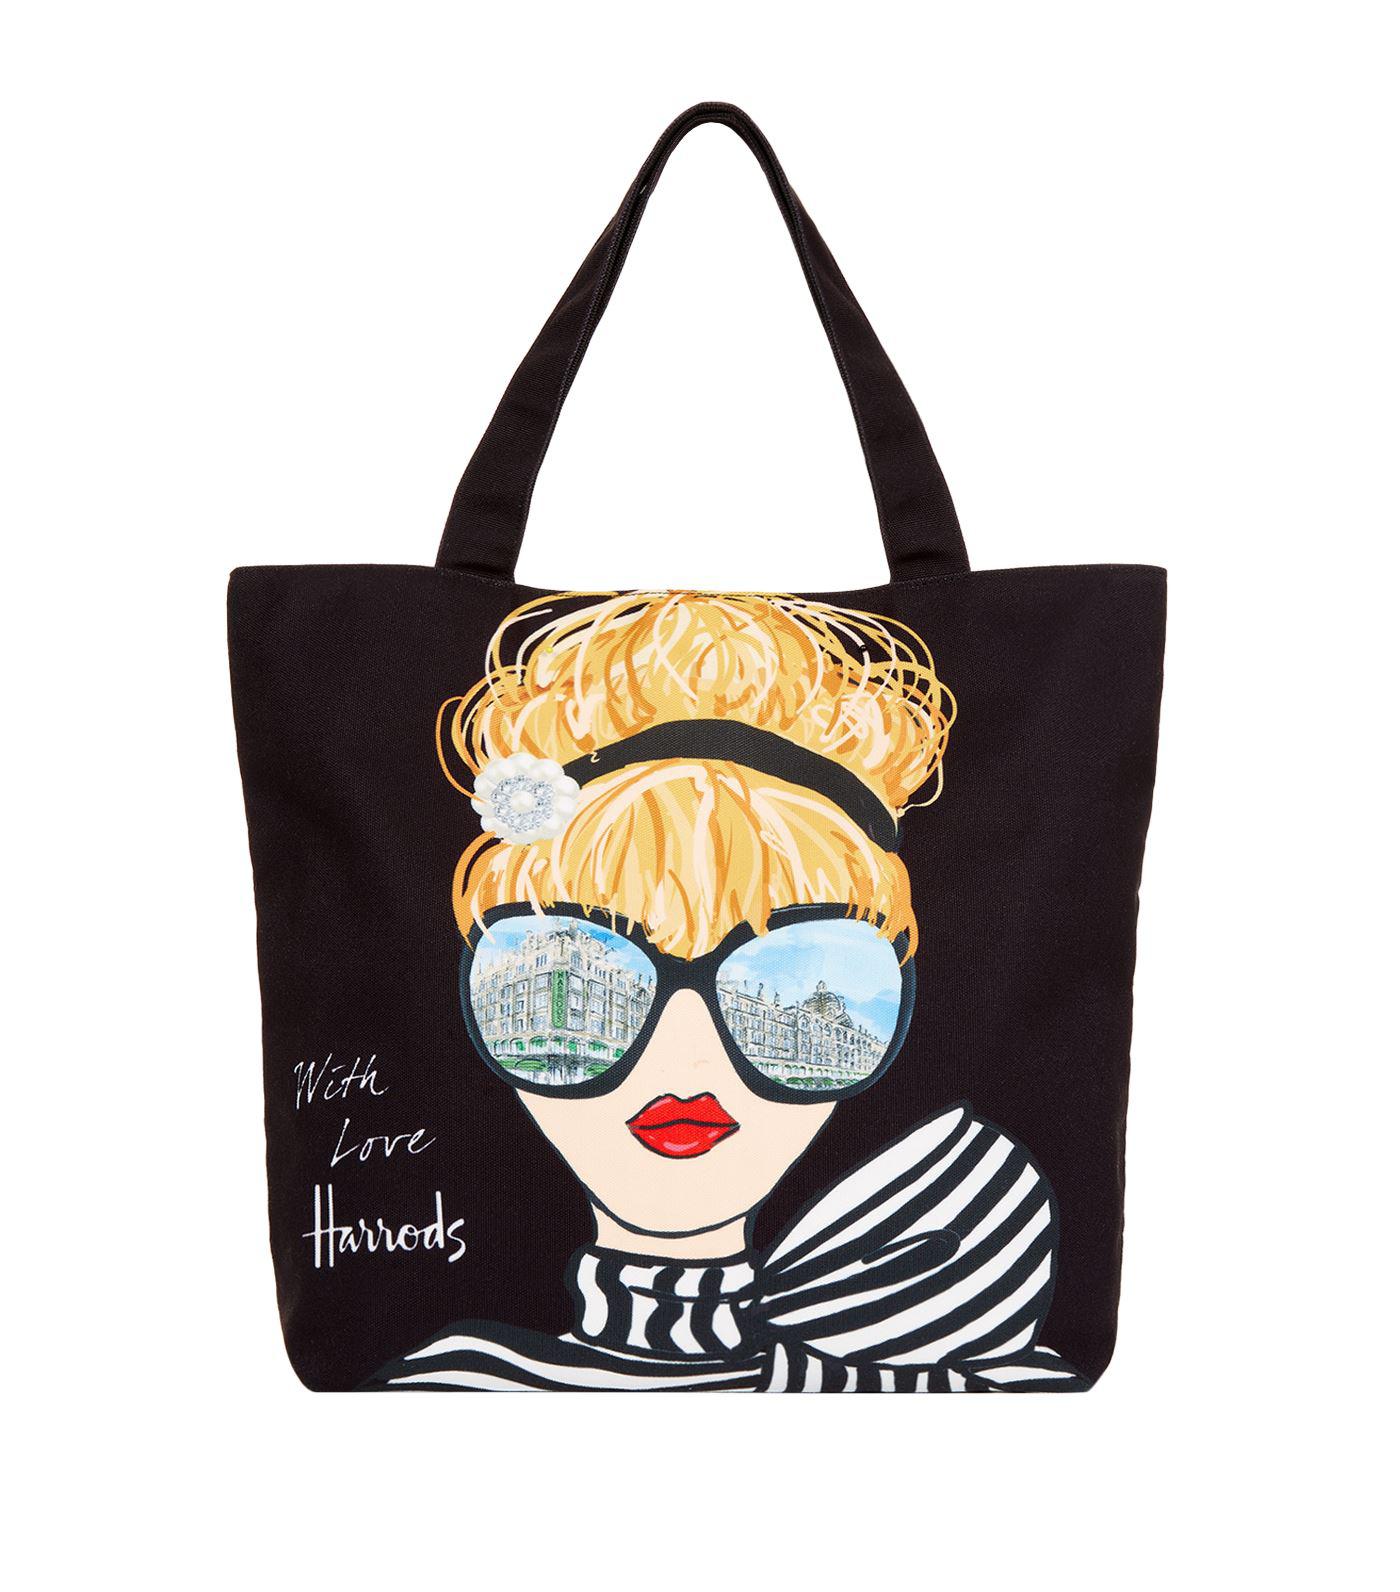 Harrods Glamourous Girls Canvas Bag in Black - Lyst